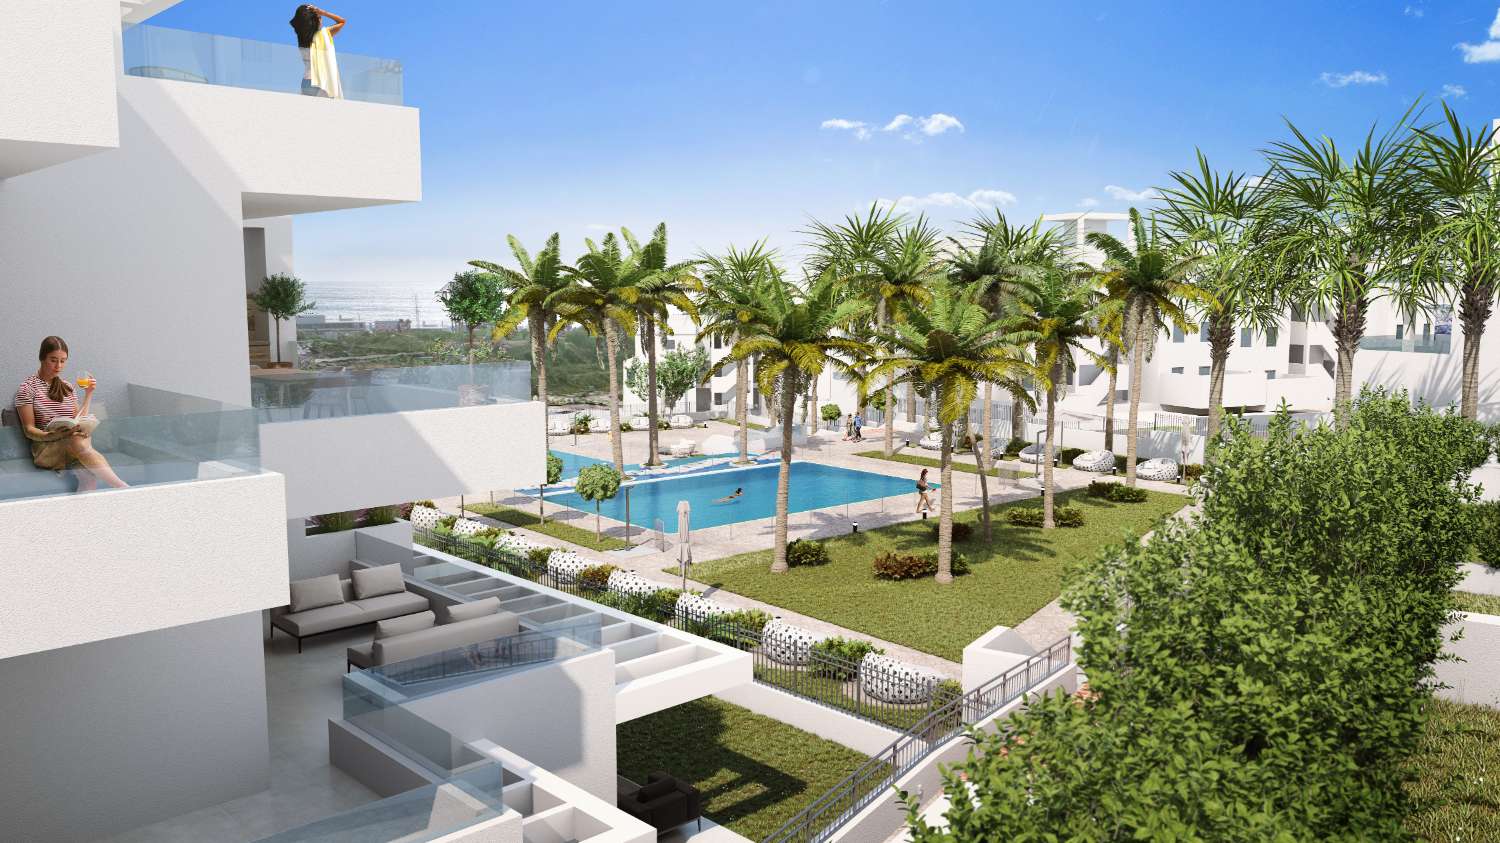 Flow into the spacious terraces. Modern. Private pools up to 19 meters. New.